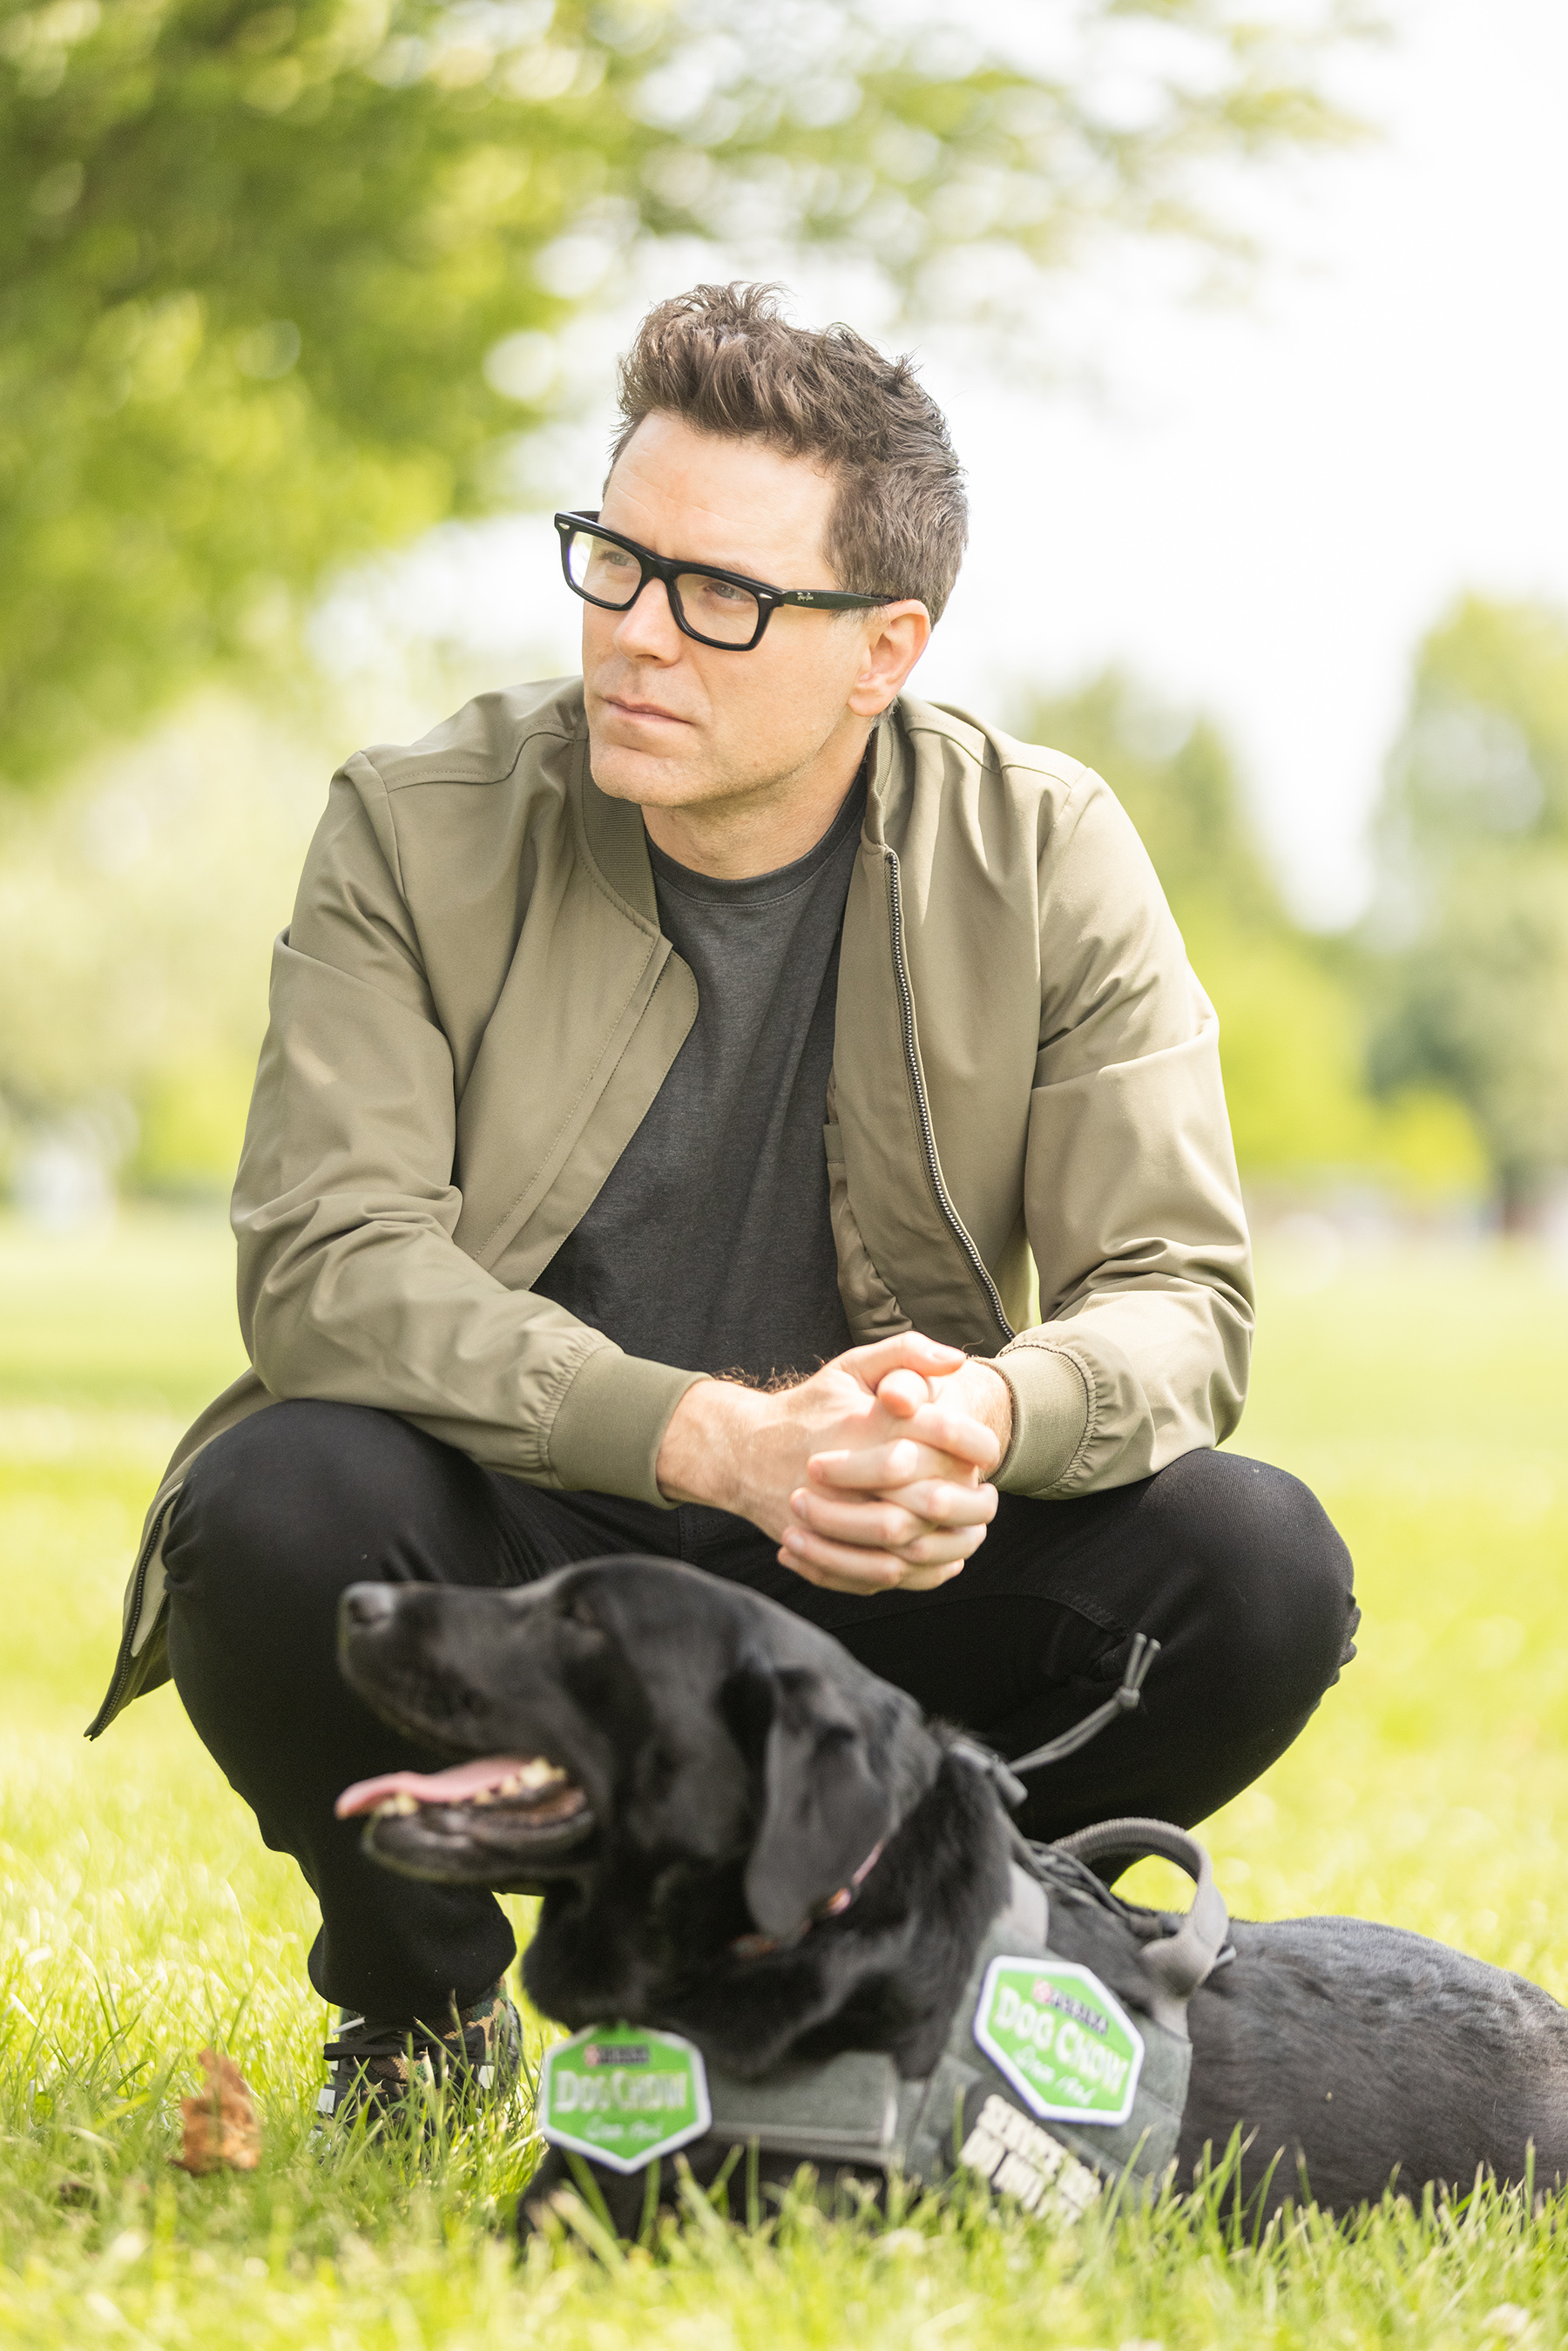 Dog Chow partner and TV/radio personality Bobby Bones participates in the fourth annual Dog Chow Service Dog Salute campaign